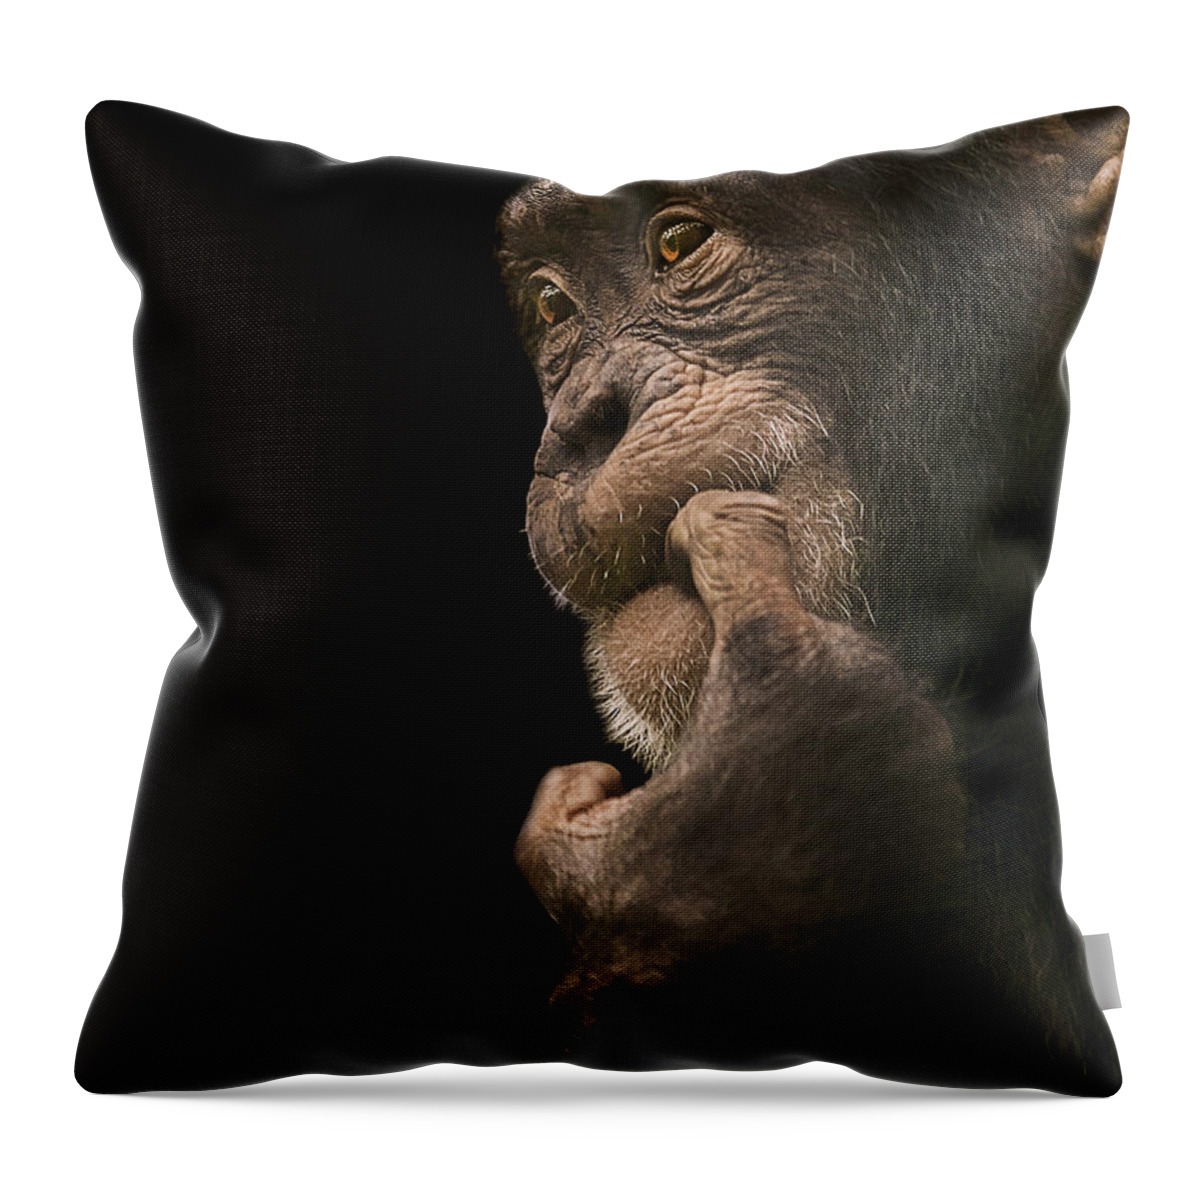 Chimpanzee Throw Pillow featuring the photograph Promiscuous Girl by Paul Neville